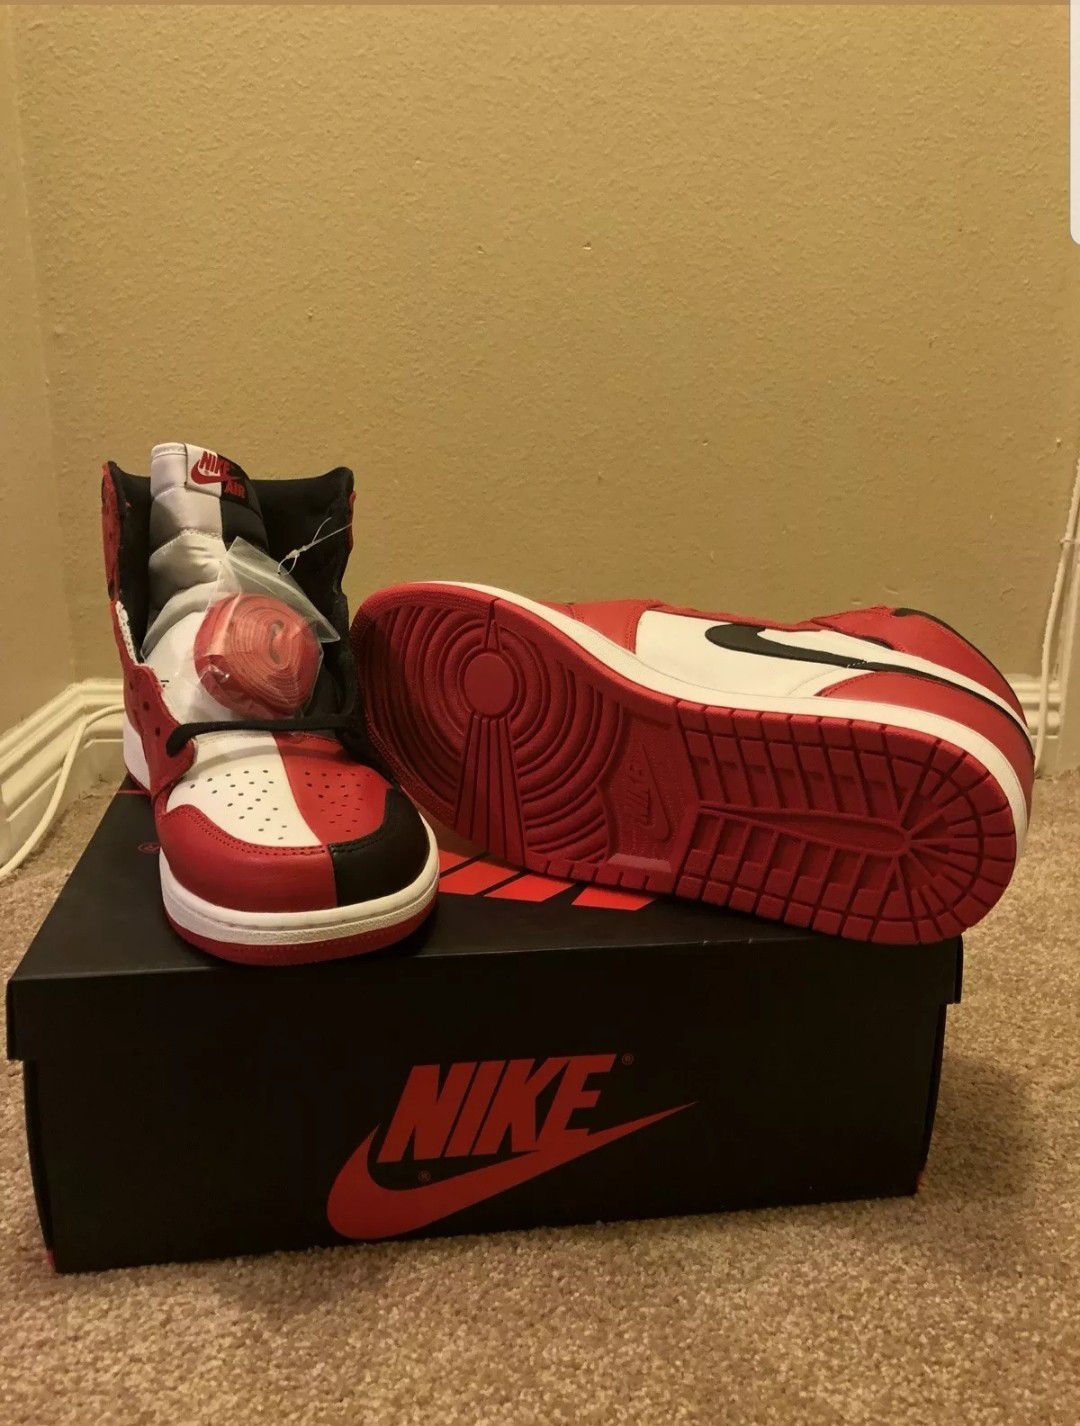 Ds Jordan 1 homage to home Size 11.5... would traded for nmds (that's in the second pic)